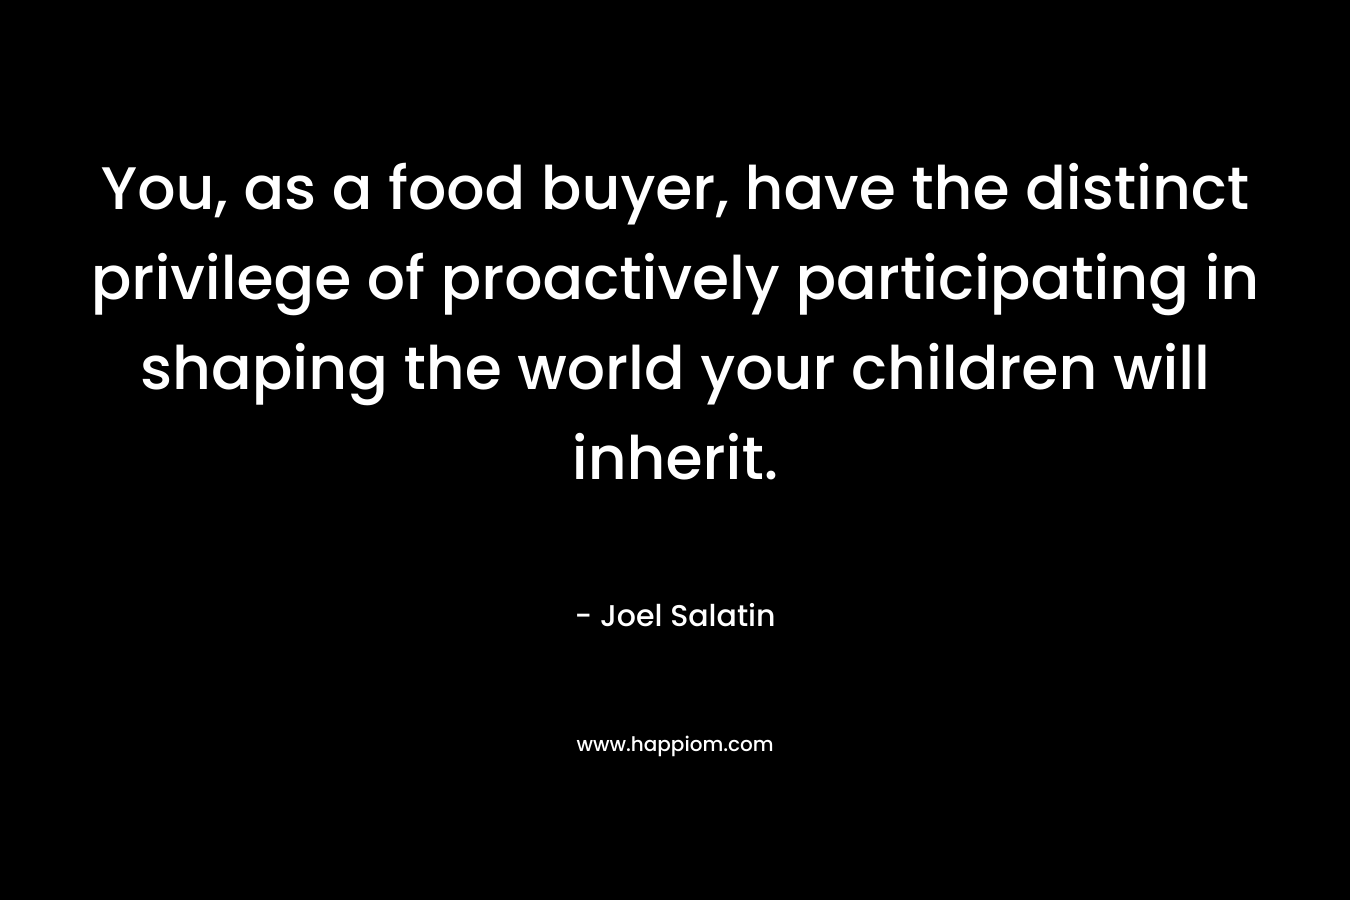 You, as a food buyer, have the distinct privilege of proactively participating in shaping the world your children will inherit.